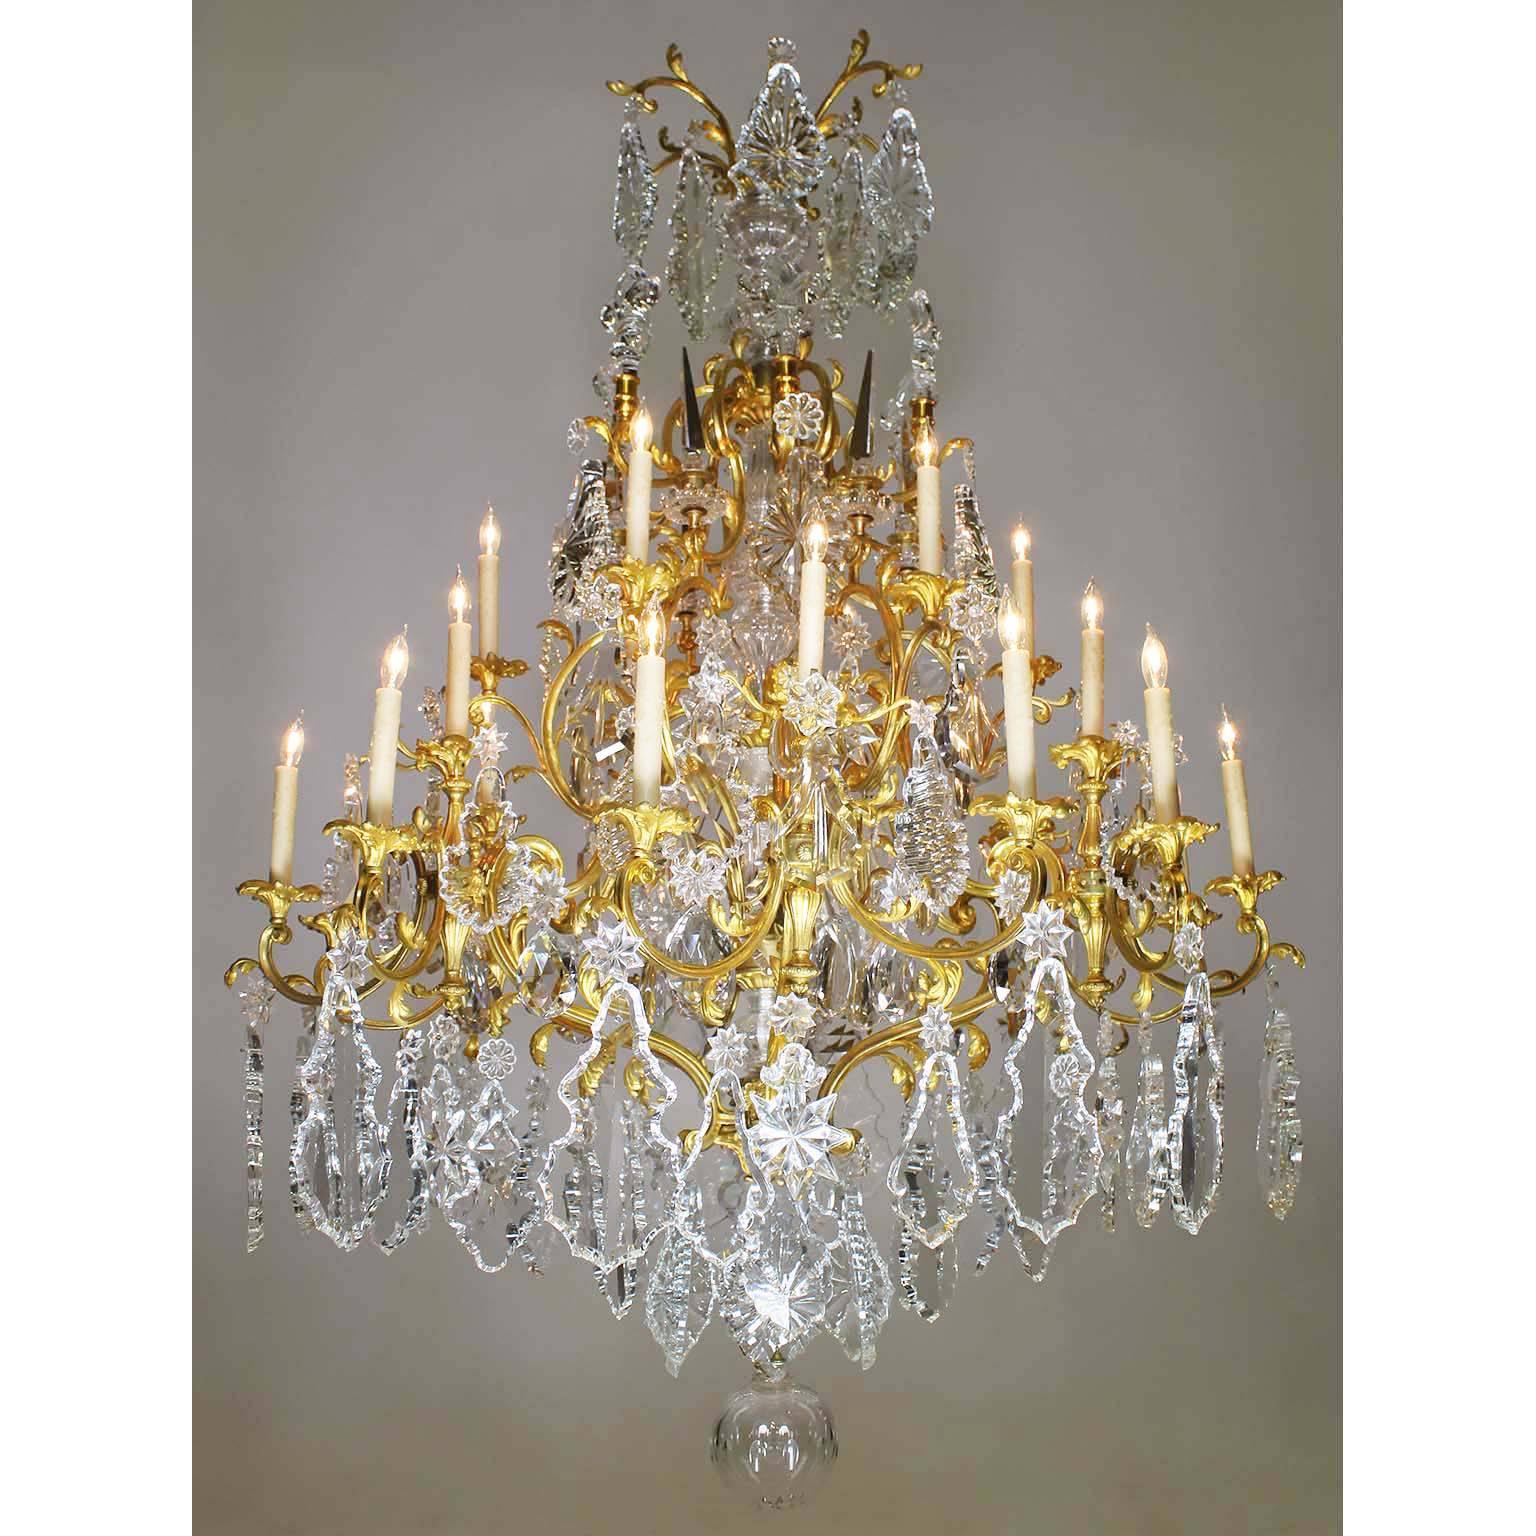 A very fine and Palatial French 19th century Louis XV Style gilt bronze, crystal and cut-glass Twenty-Four-light chandelier, probably by Baccarat. The central molded cut-glass stem surmounted with crystal obelisks, fleur de lis and cut-crystal